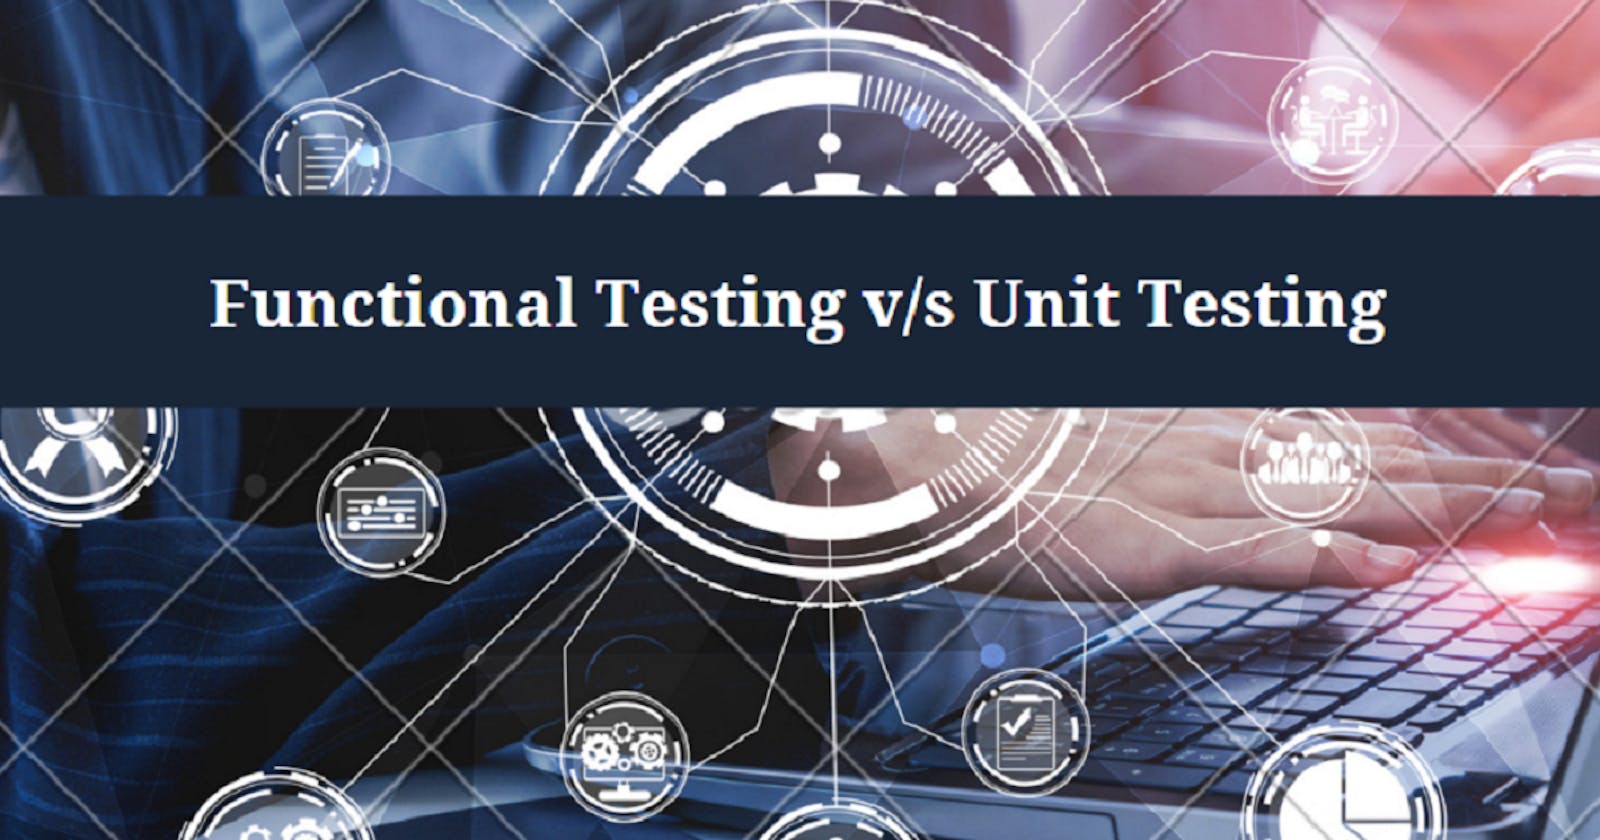 Functional Testing v/s Unit Testing: What Is The Difference?